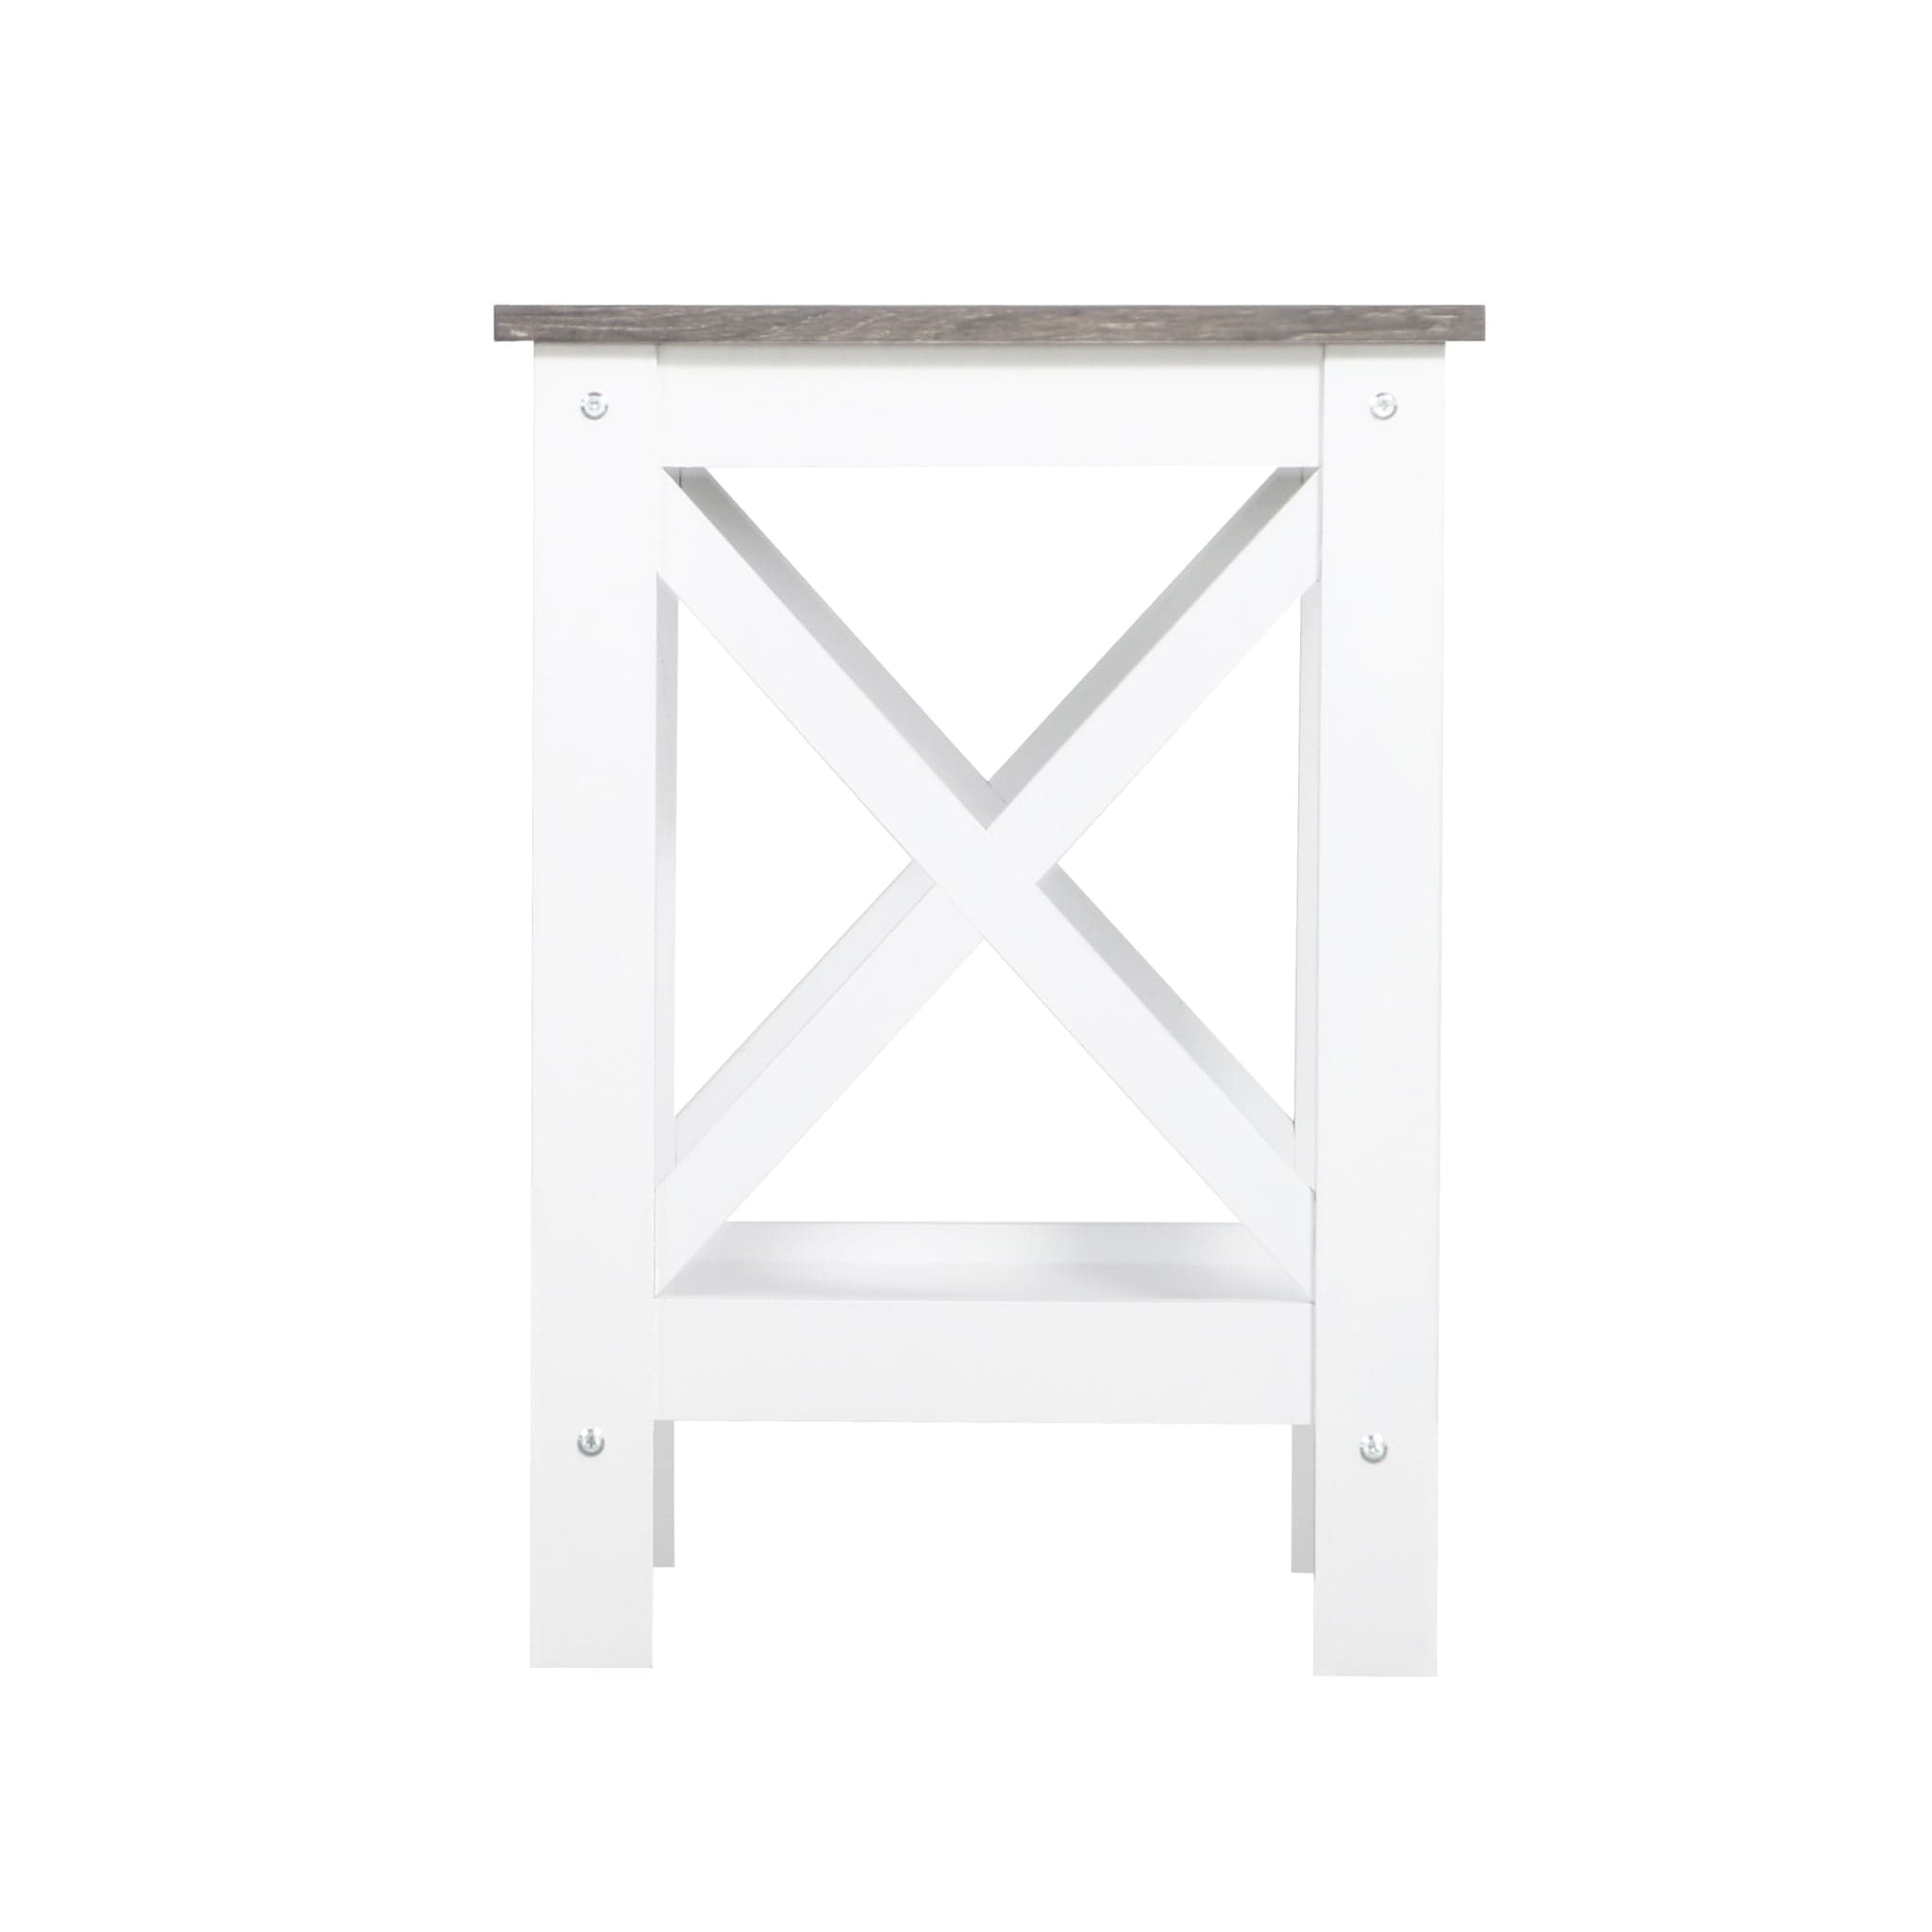 Coastal Side Table in White and Grey